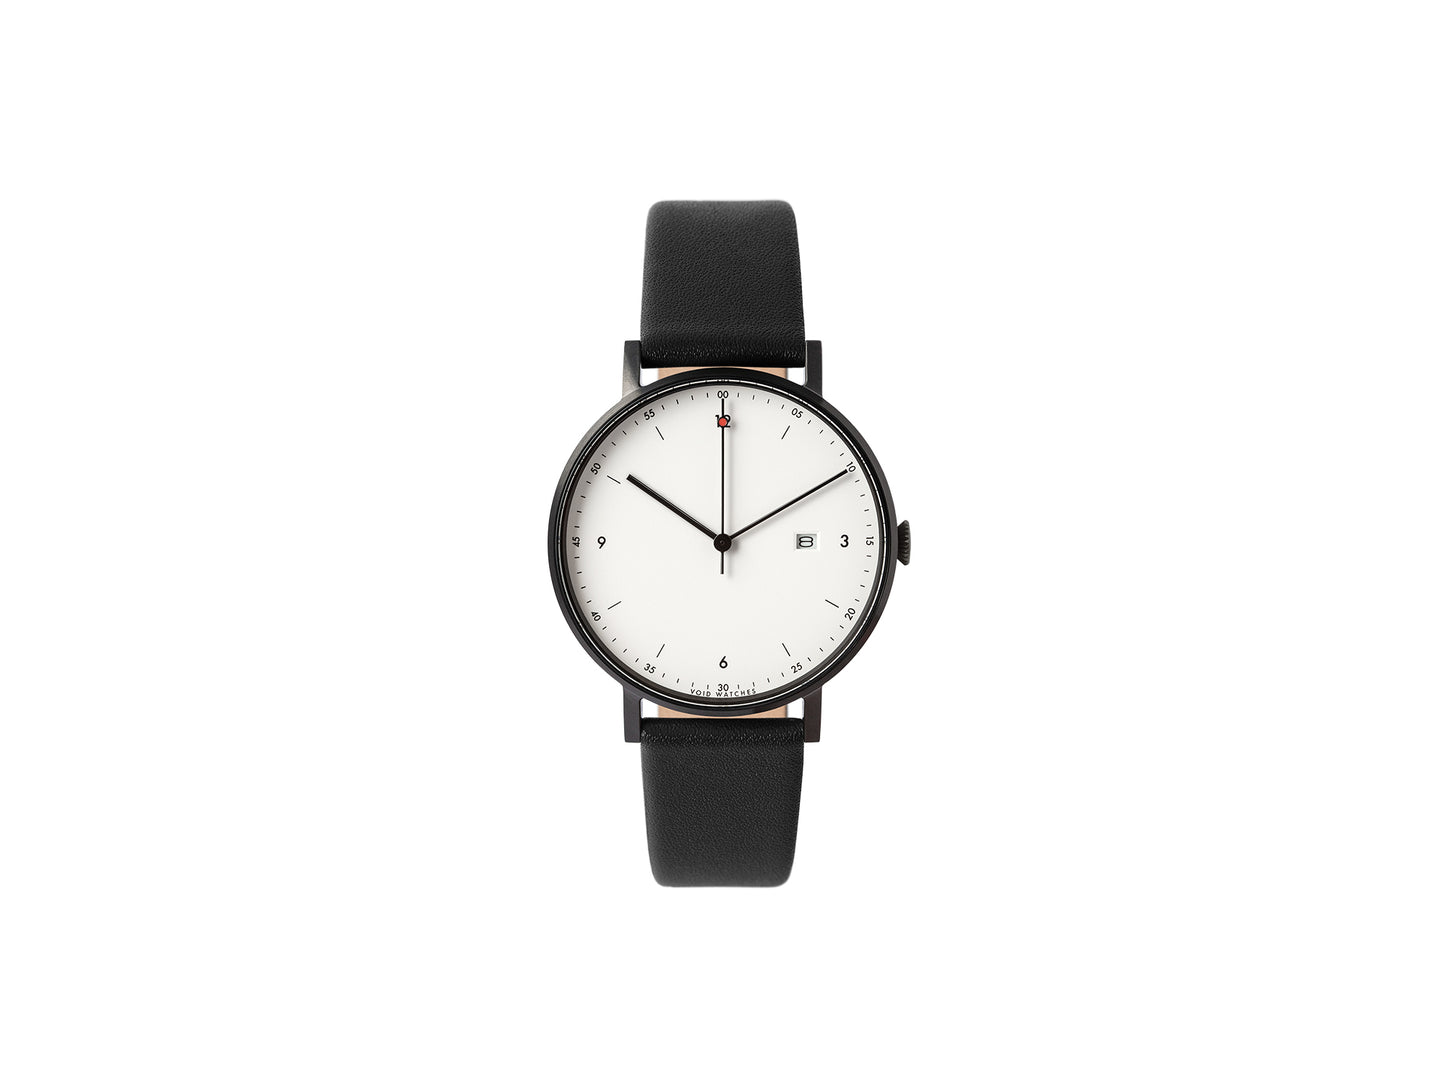 PKG01 Black and Black by Void Watches